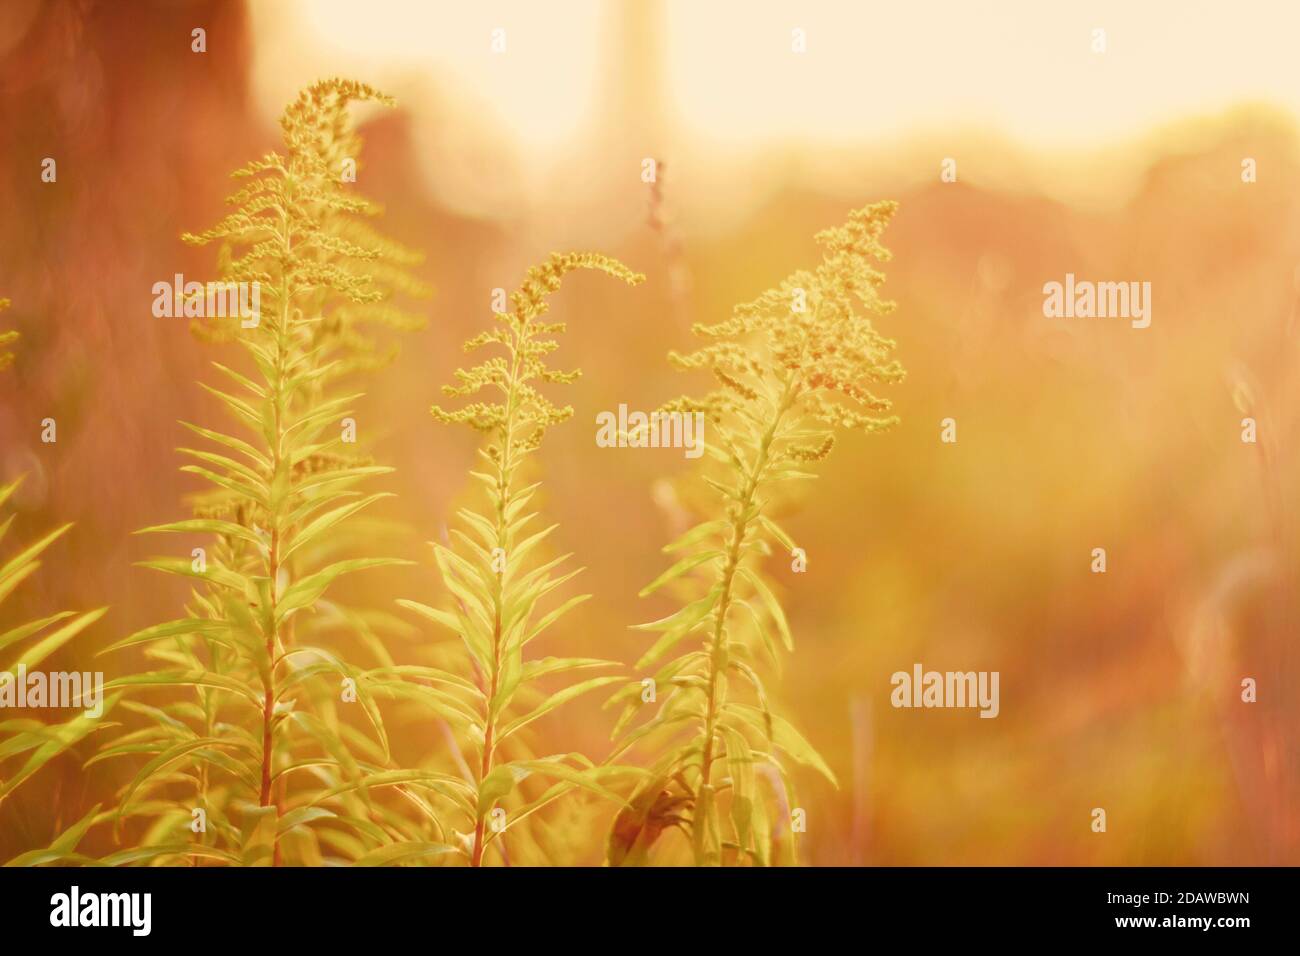 Blooming goldenrod (Solidago altissima) in sunset with low dof, soft focus Stock Photo